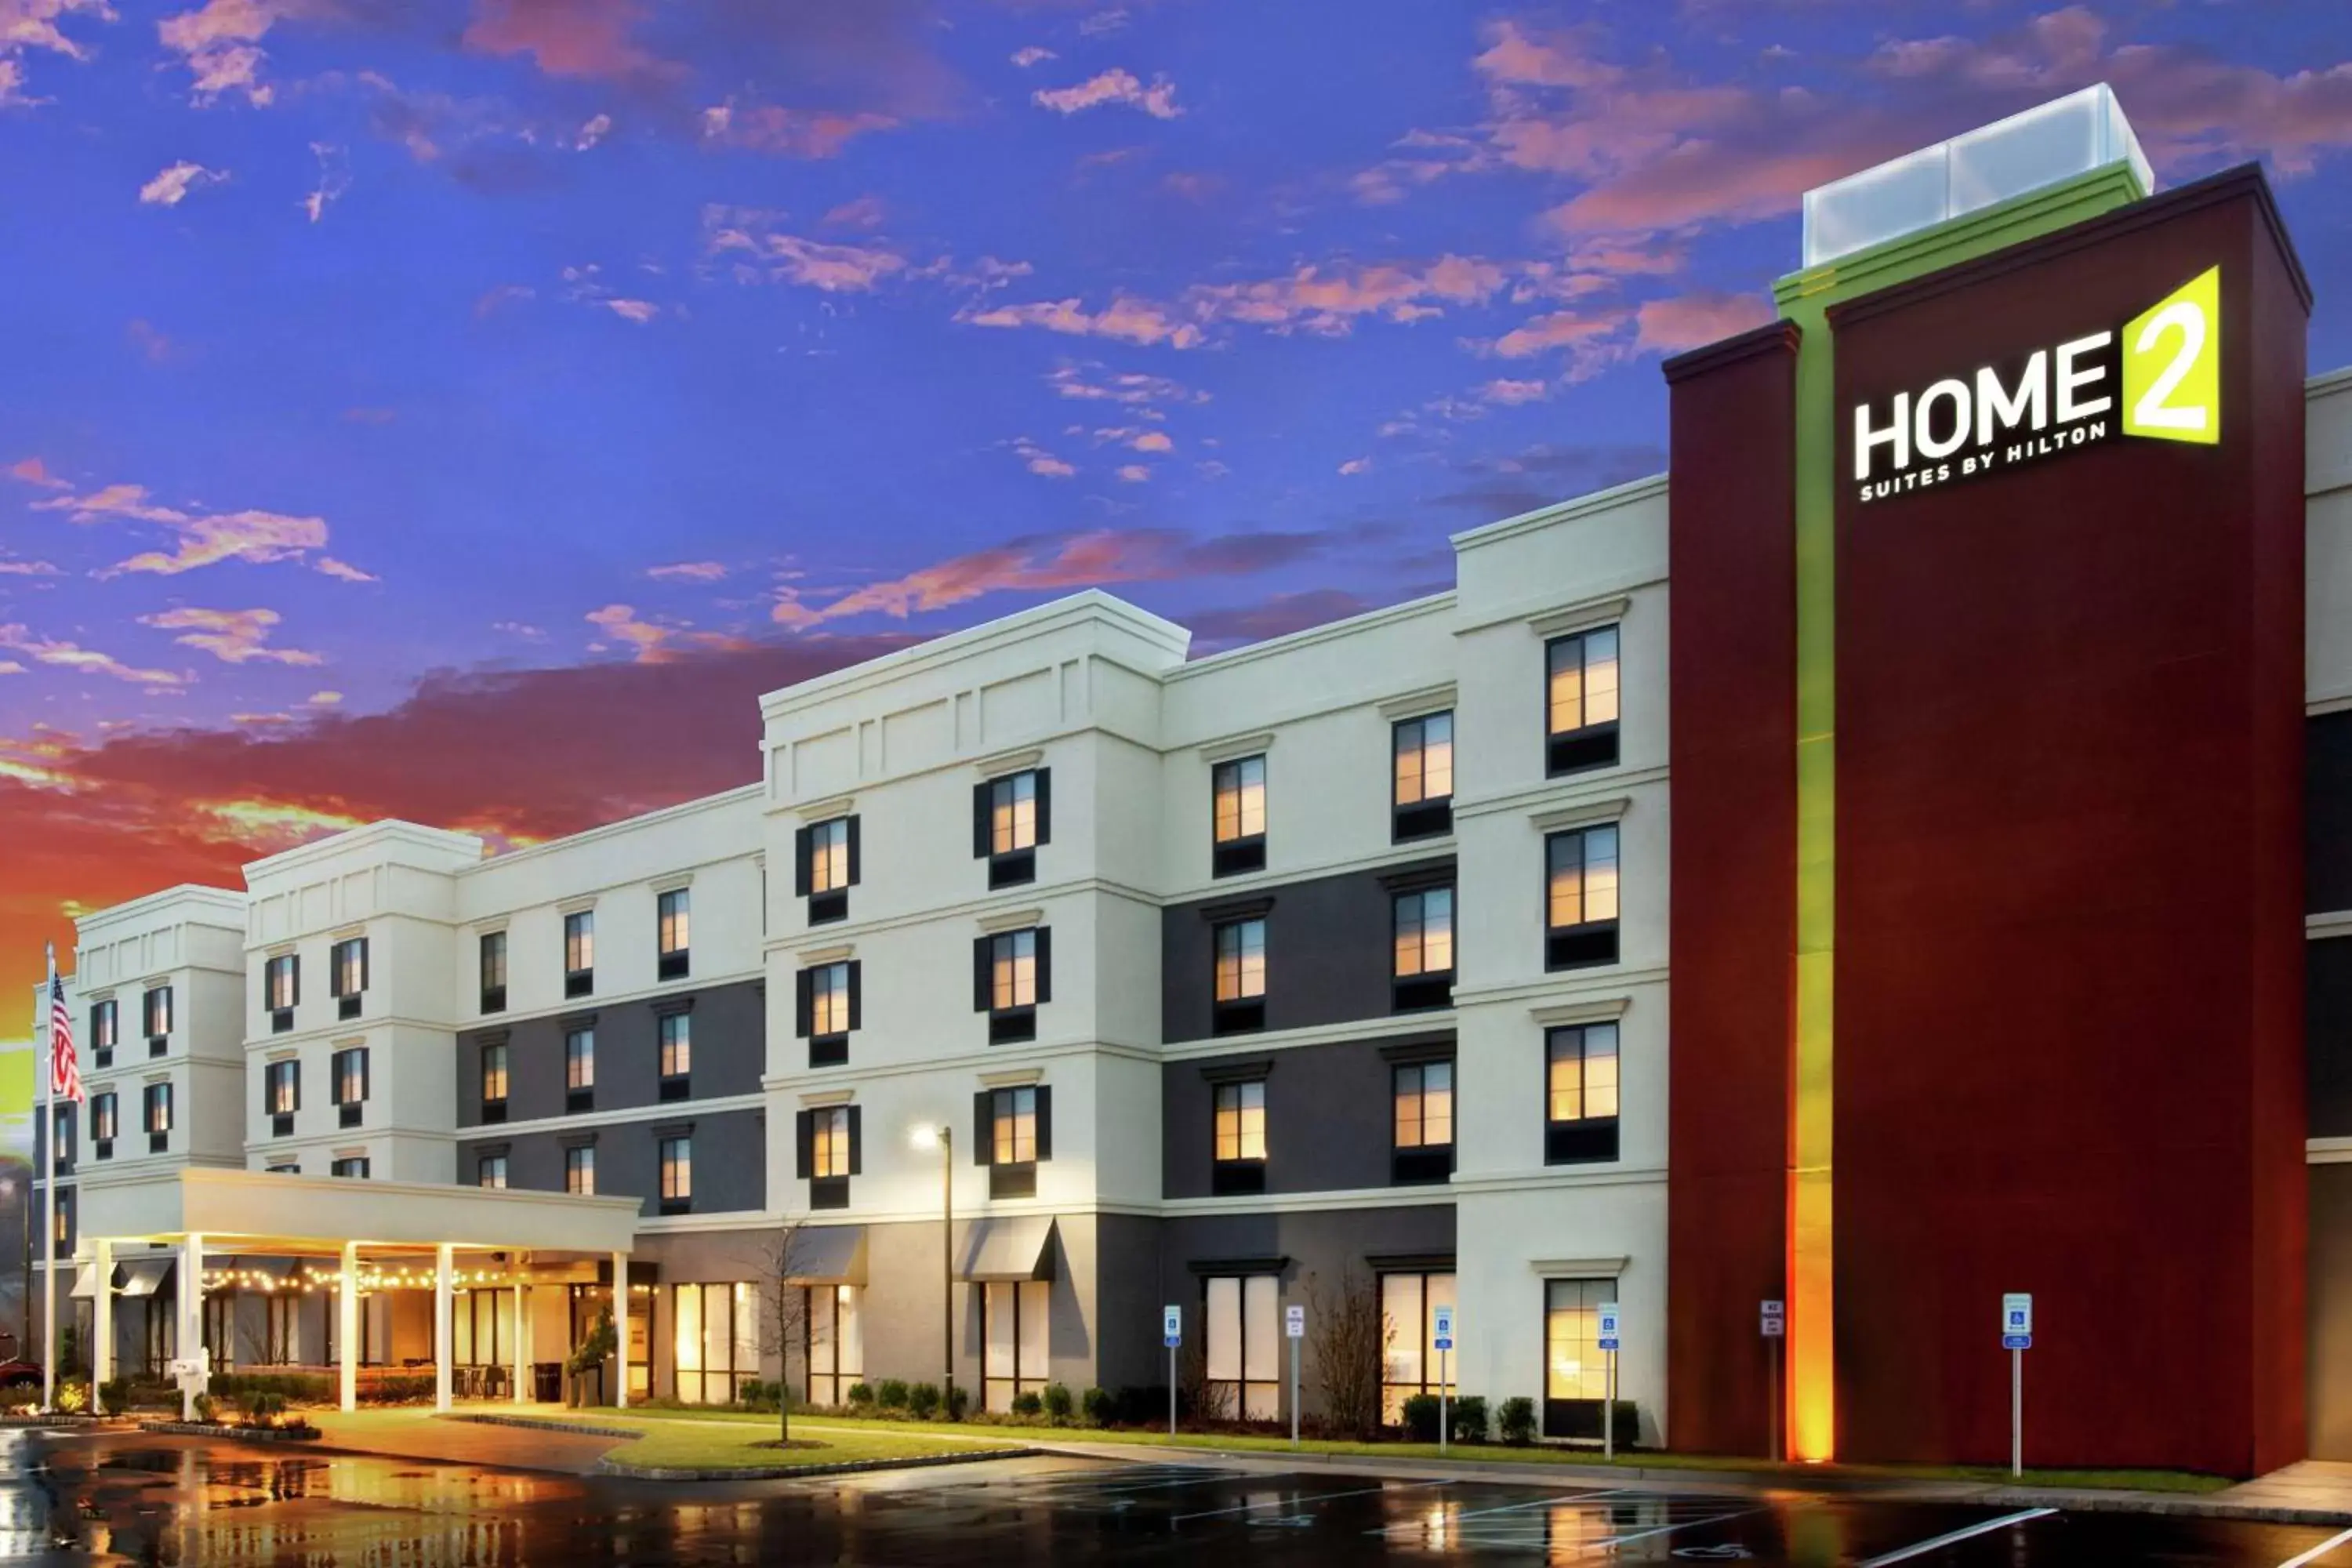 Property Building in Home2 Suites by Hilton Long Island Brookhaven